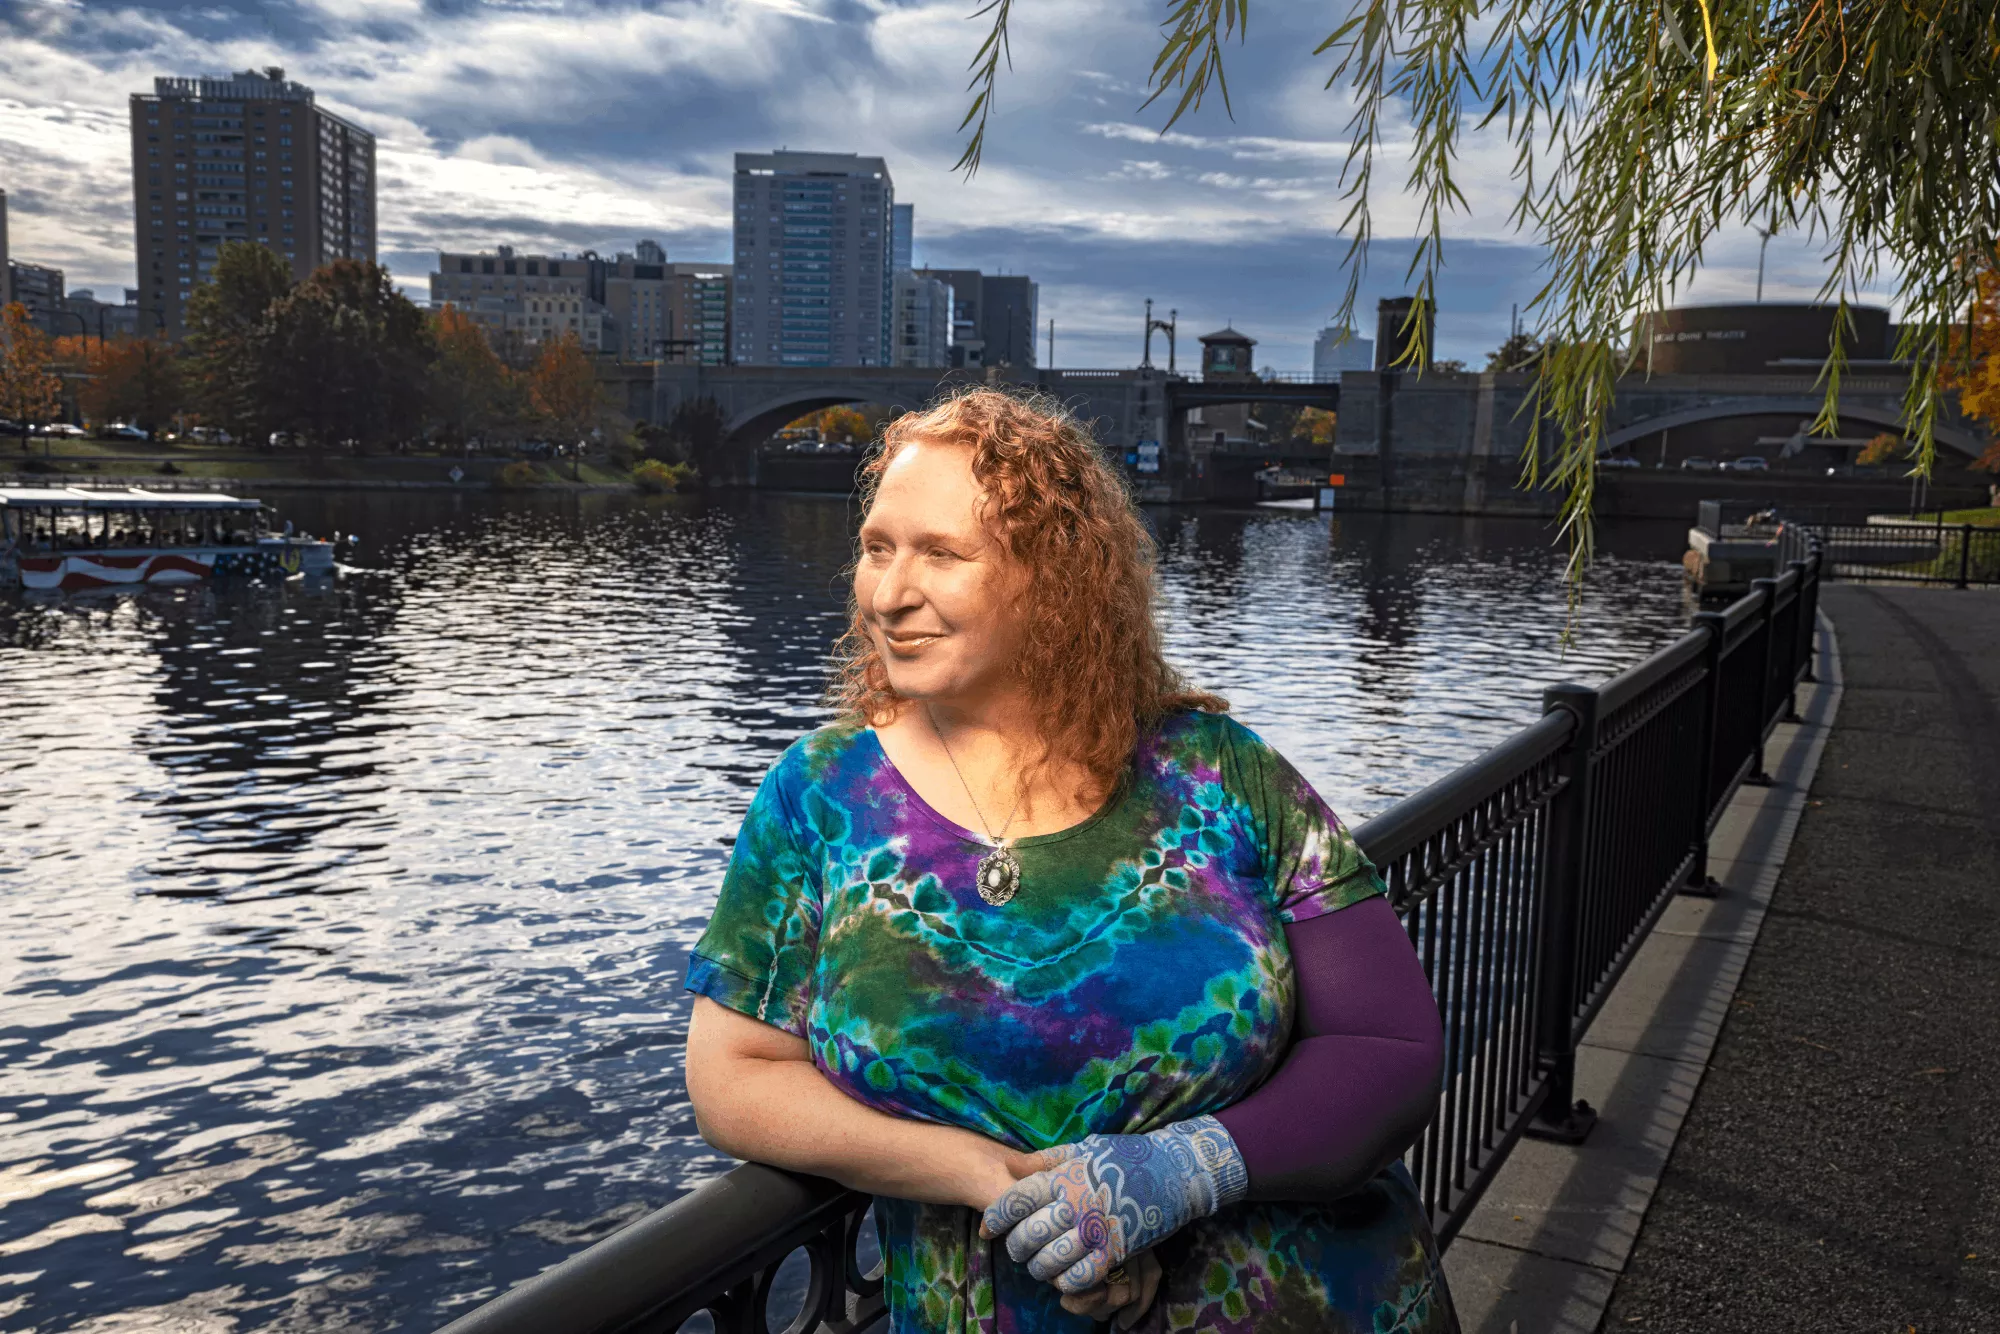  Laurie stands next to the Charles River in Boston.